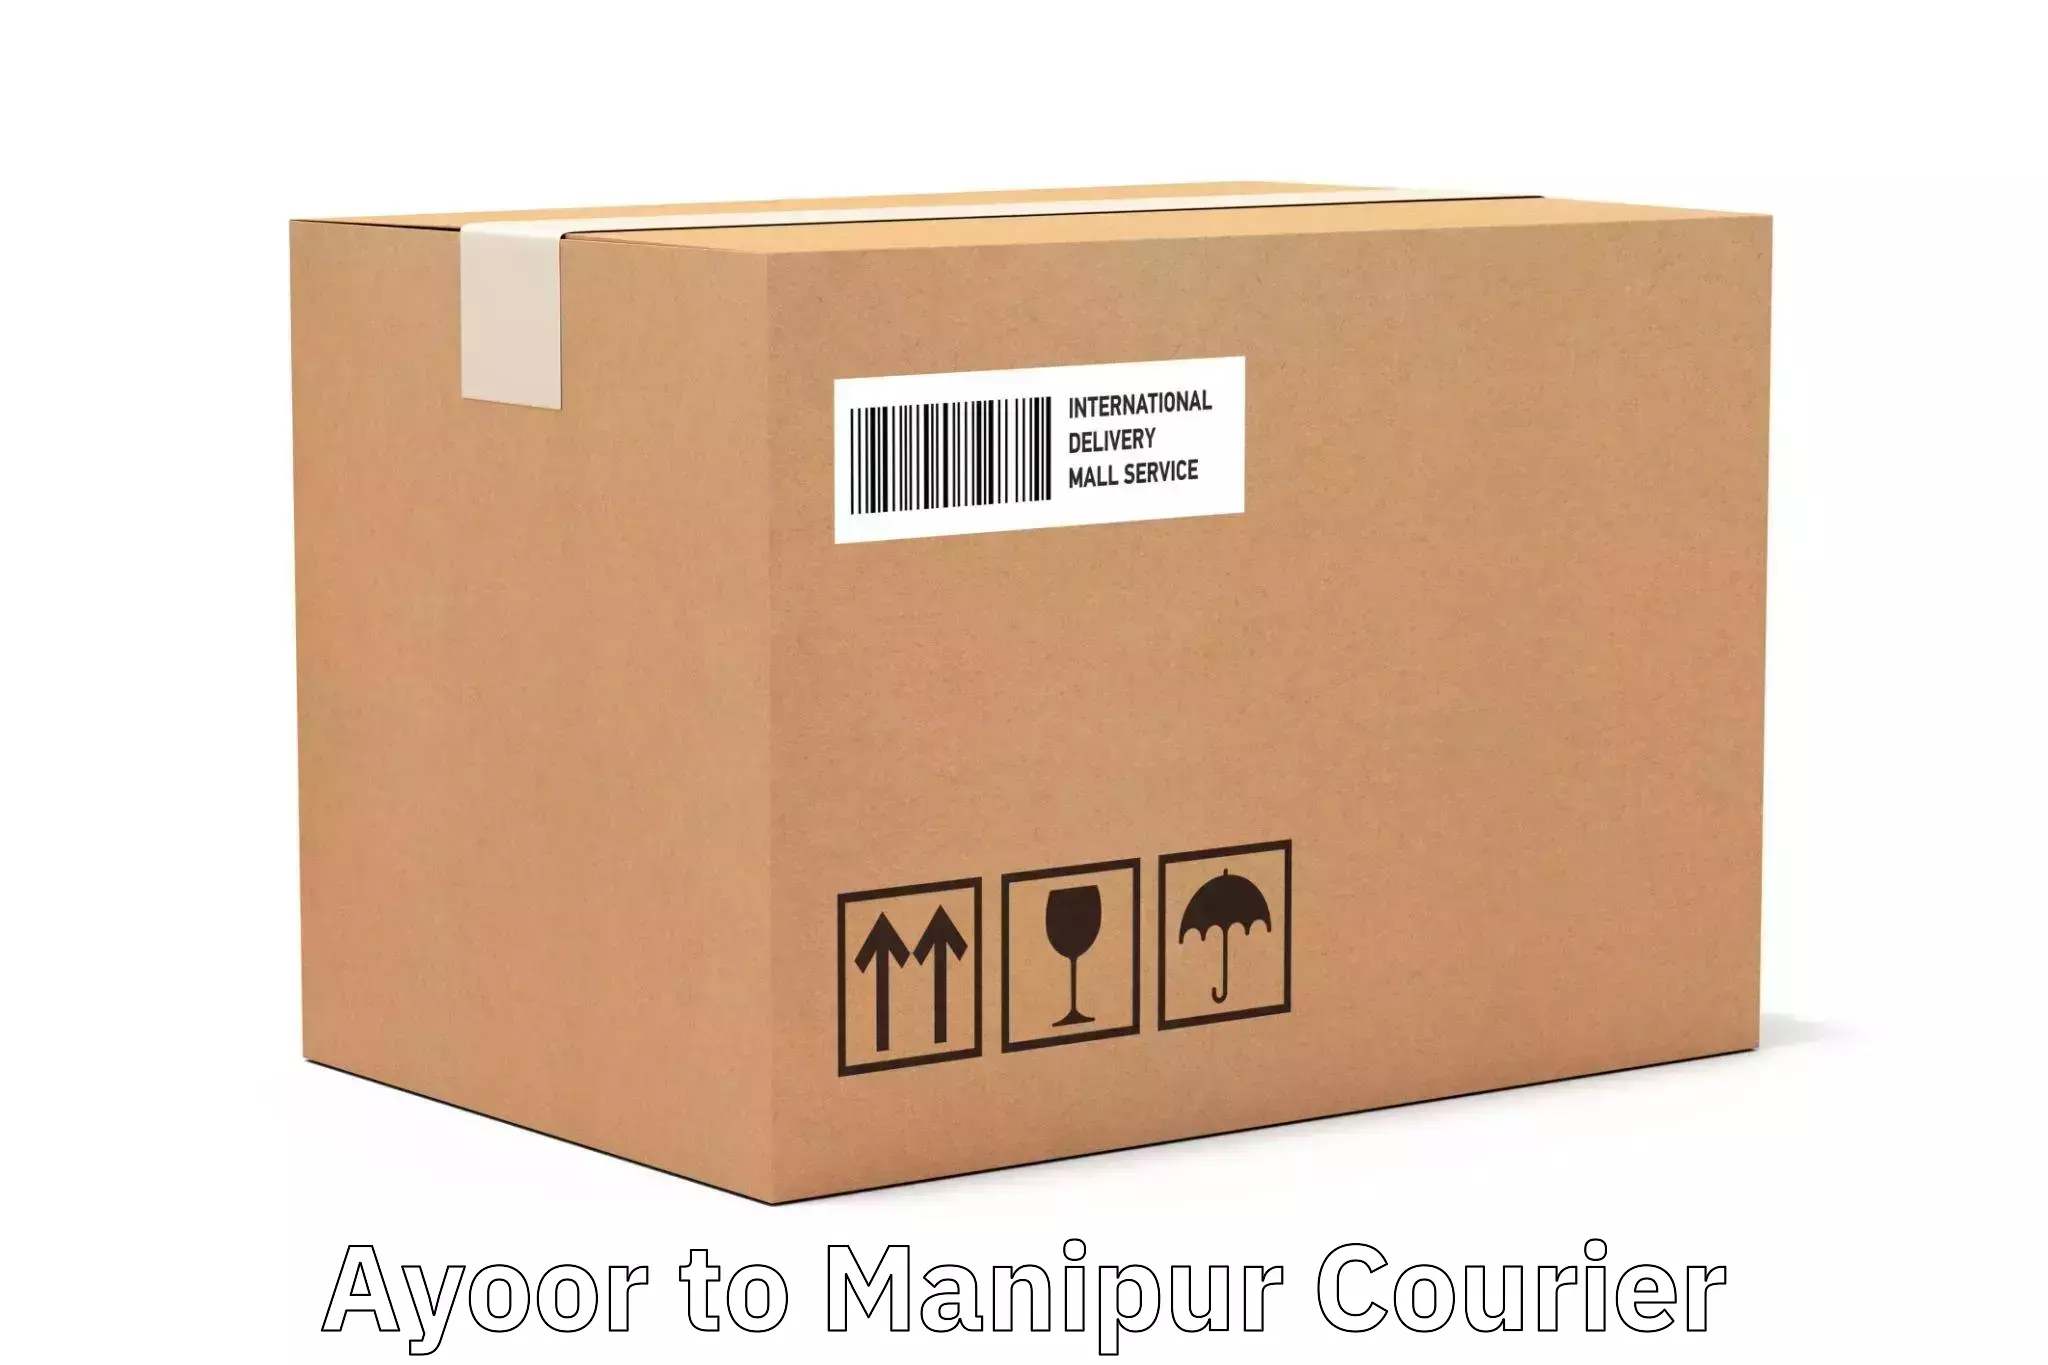 24-hour courier service Ayoor to Manipur